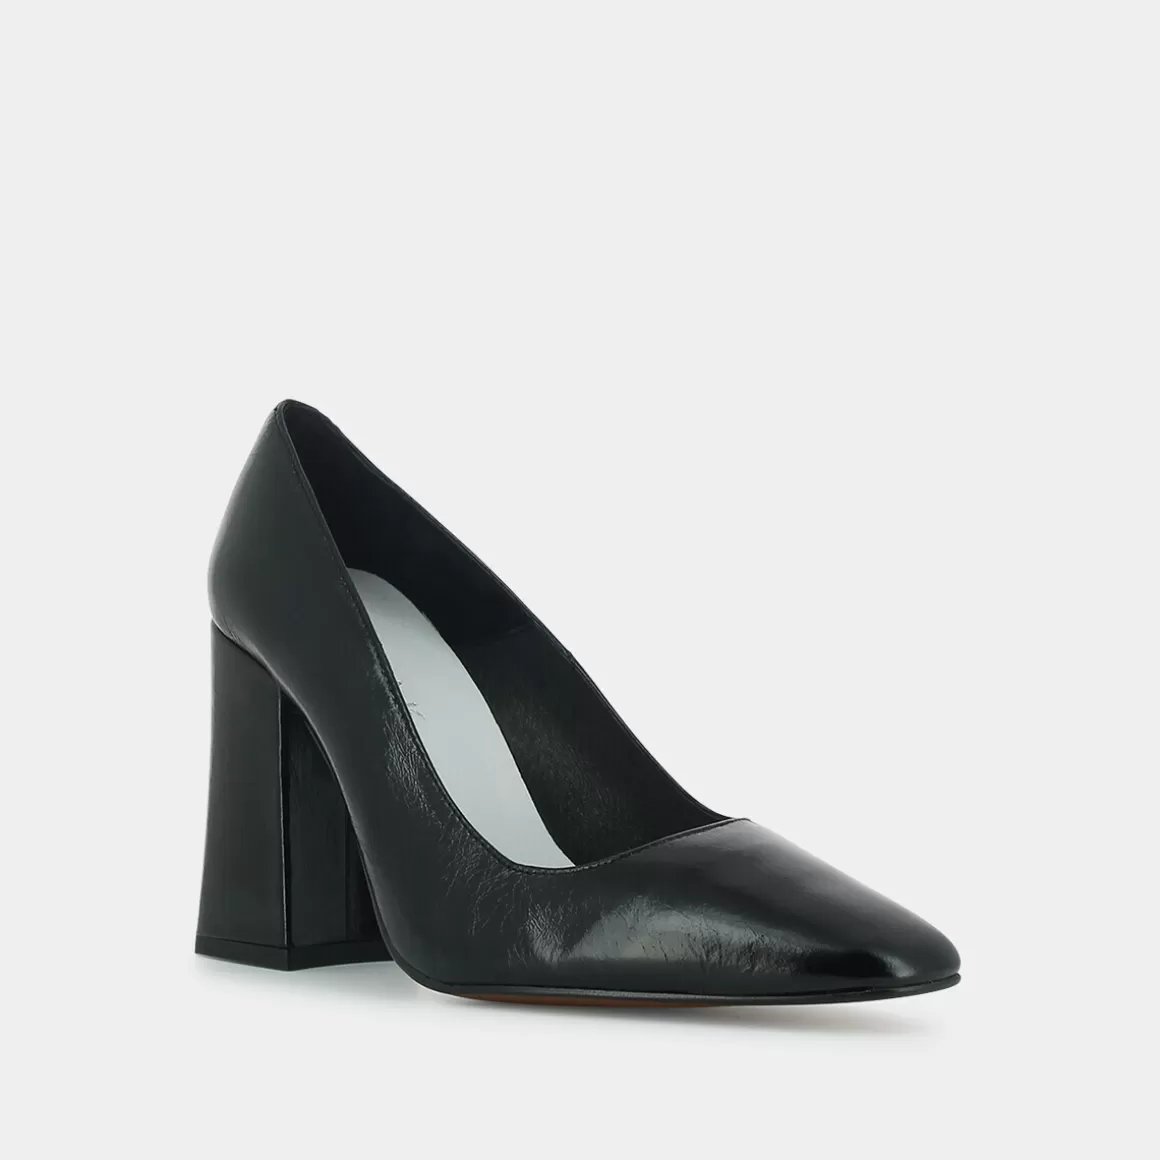 Pumps with heel and square toe<Jonak Best